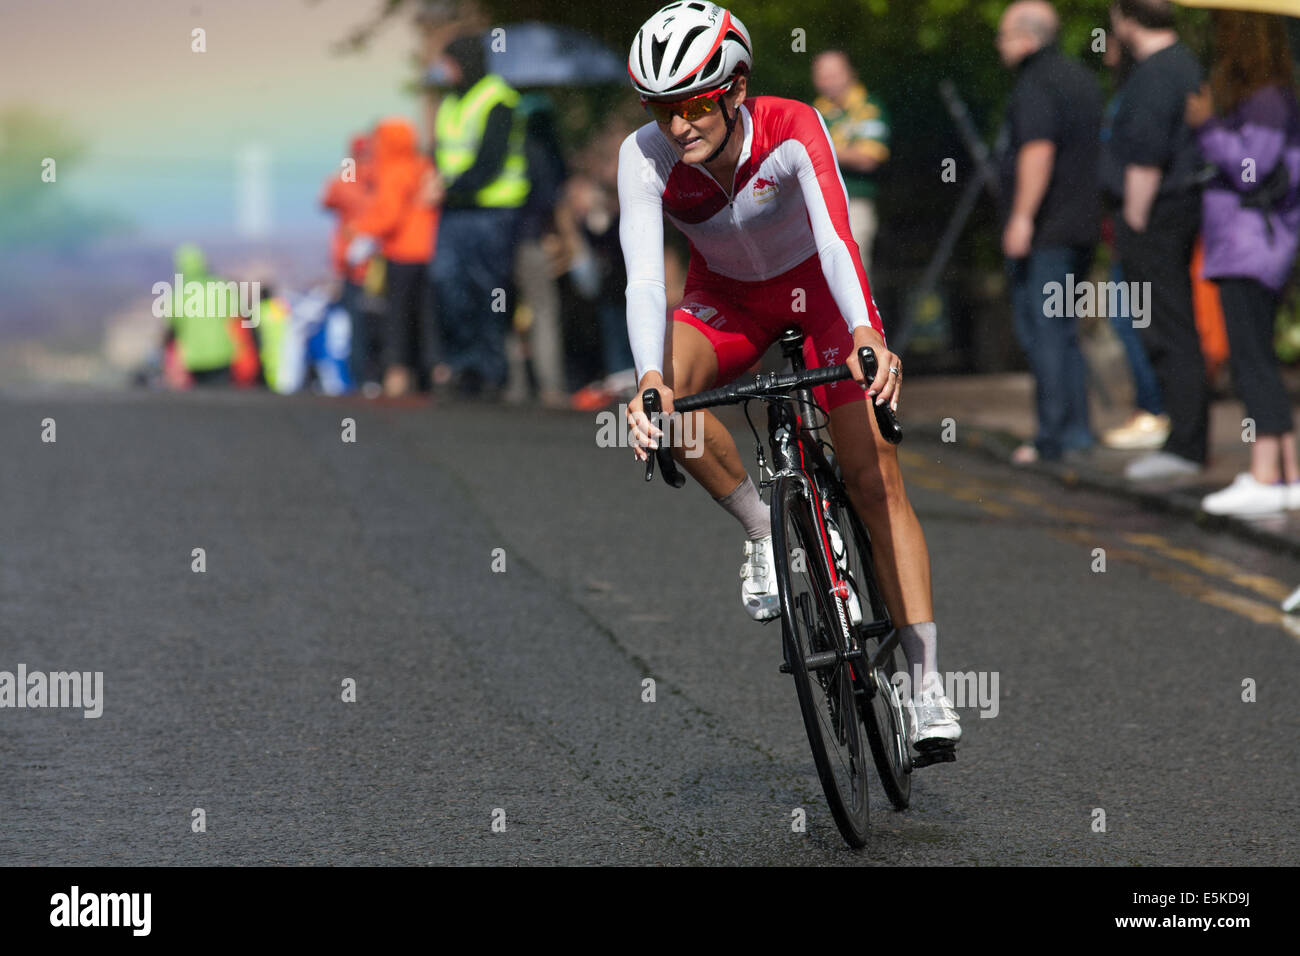 GLASGOW, UK, Scotland, 3rd August, 2014.  Lizzie Armitstead with a rainbow behind her on her way to a gold medal at the Commonwealth Games Ladies Cycling Road Race. Credit:  Ian McFarlane/Alamy Live News Stock Photo